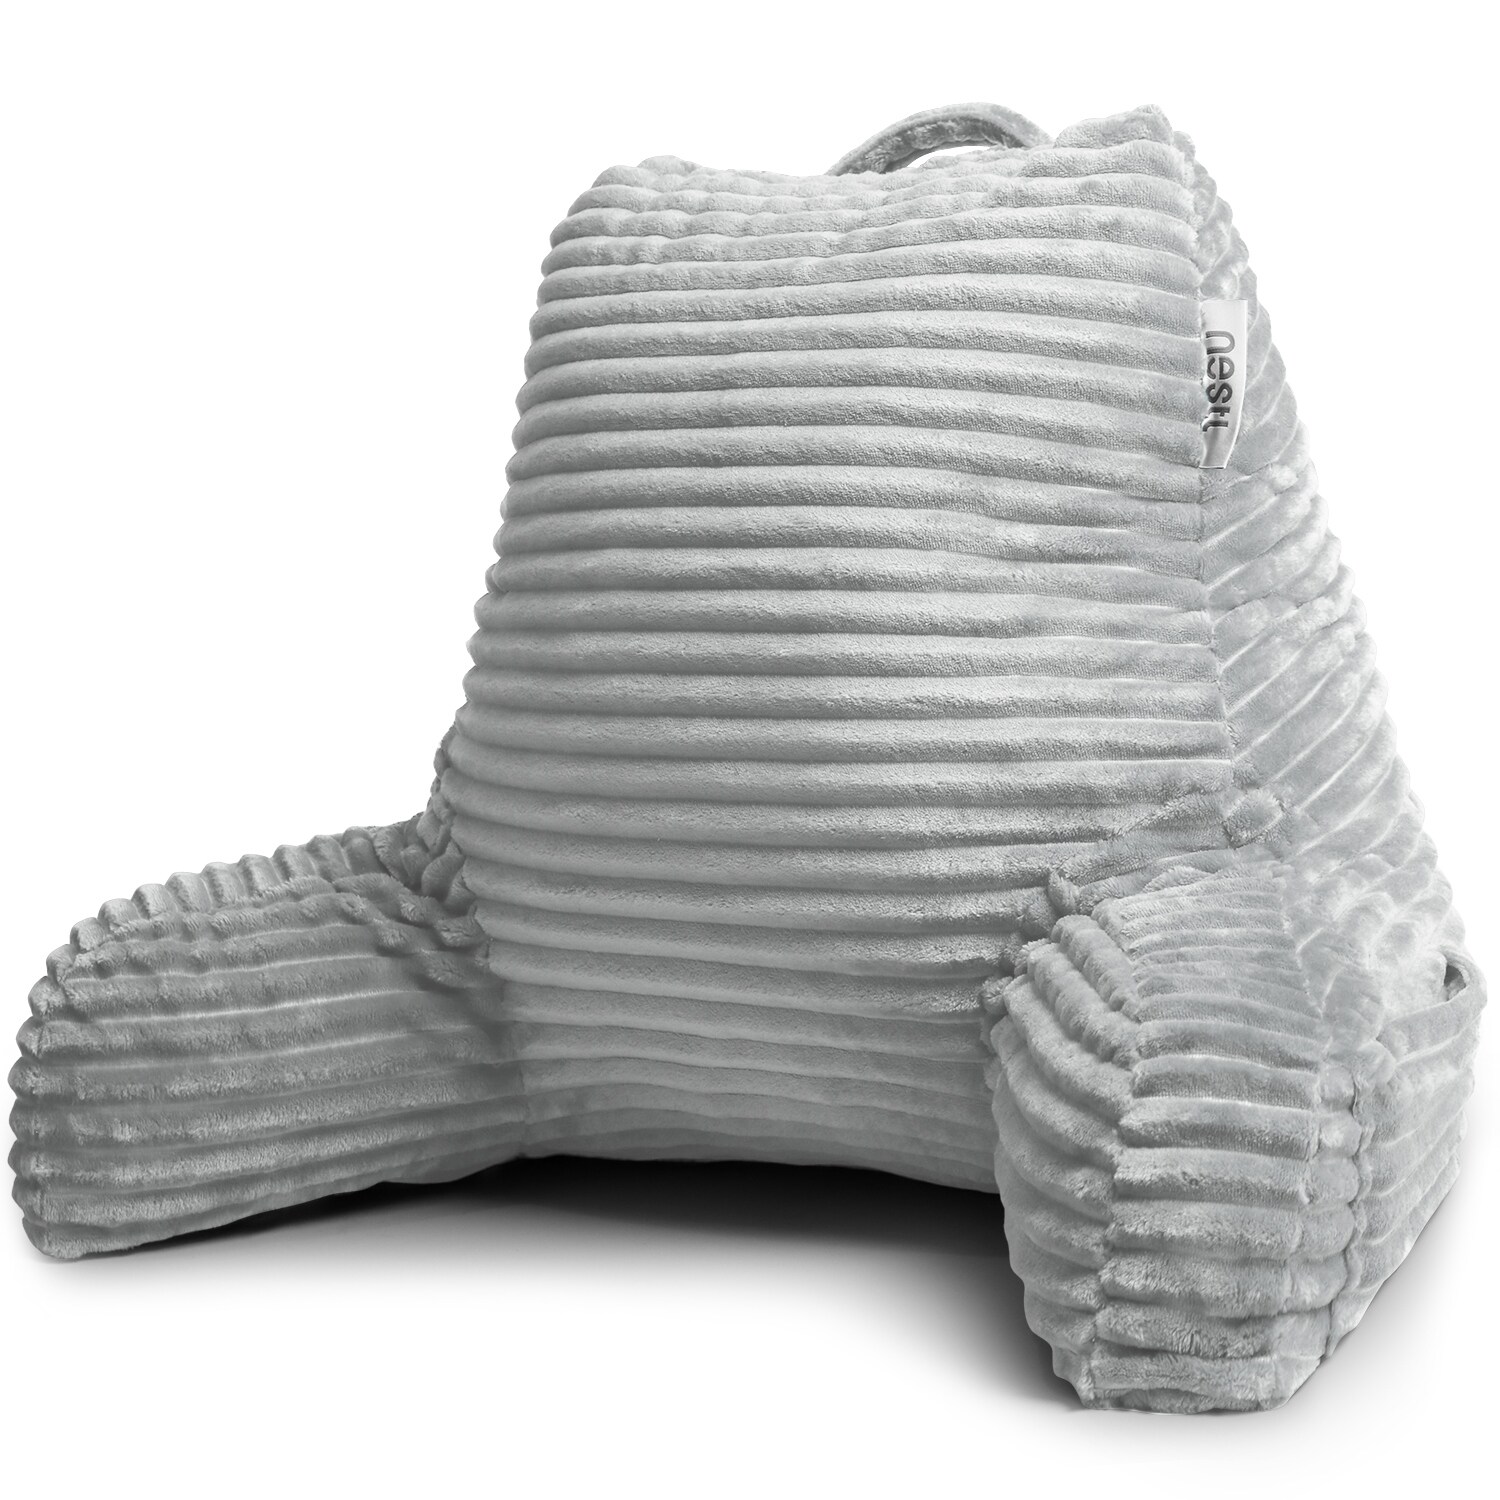 Nestl Cut Plush Striped Reading Pillow with Arms, Small - ShopStyle